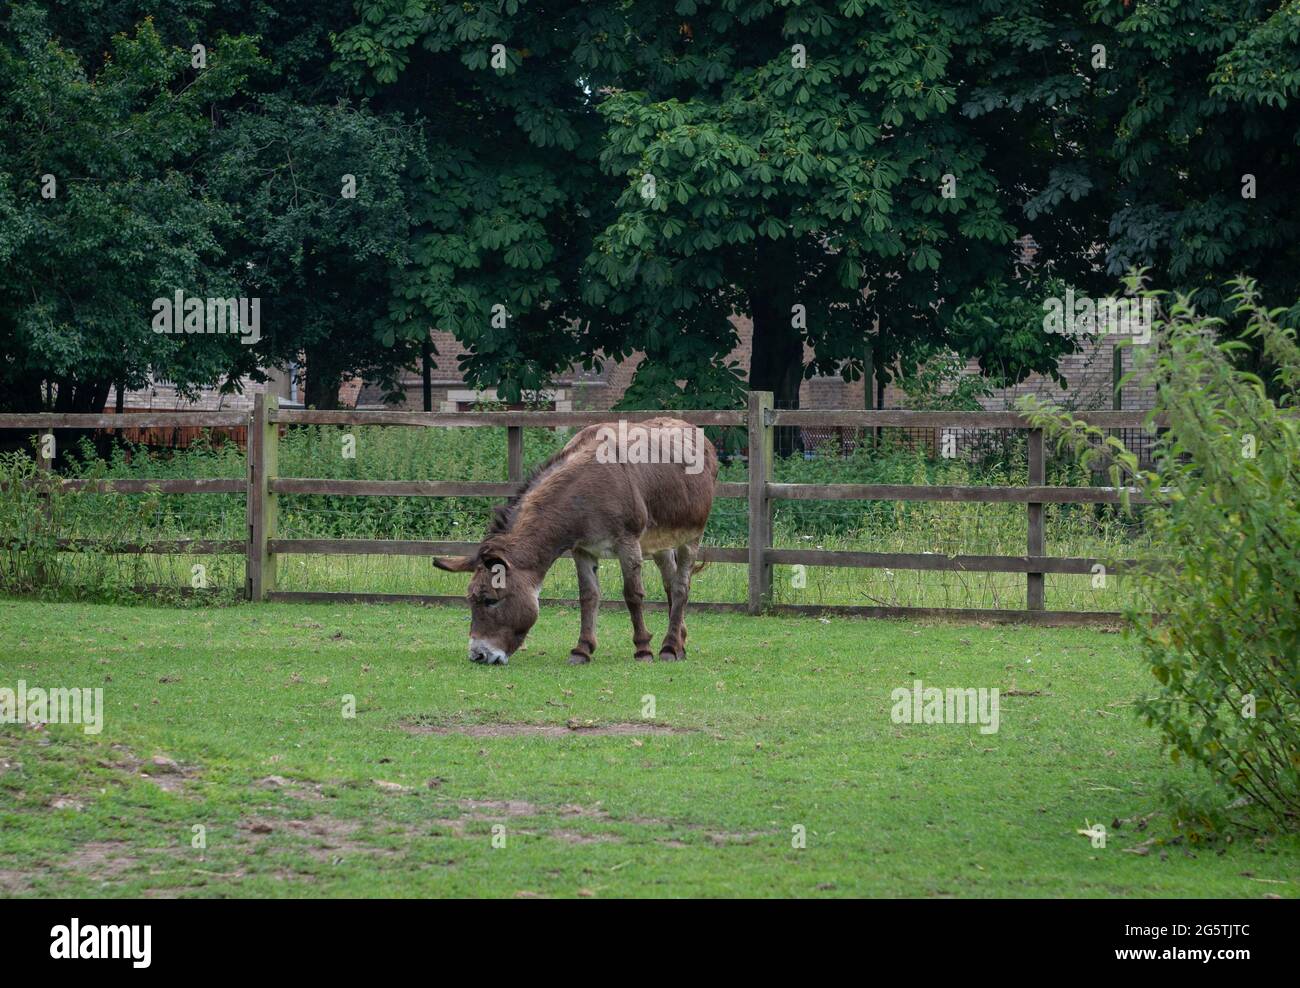 A donkey grazing in the field of a farm. Stock Photo